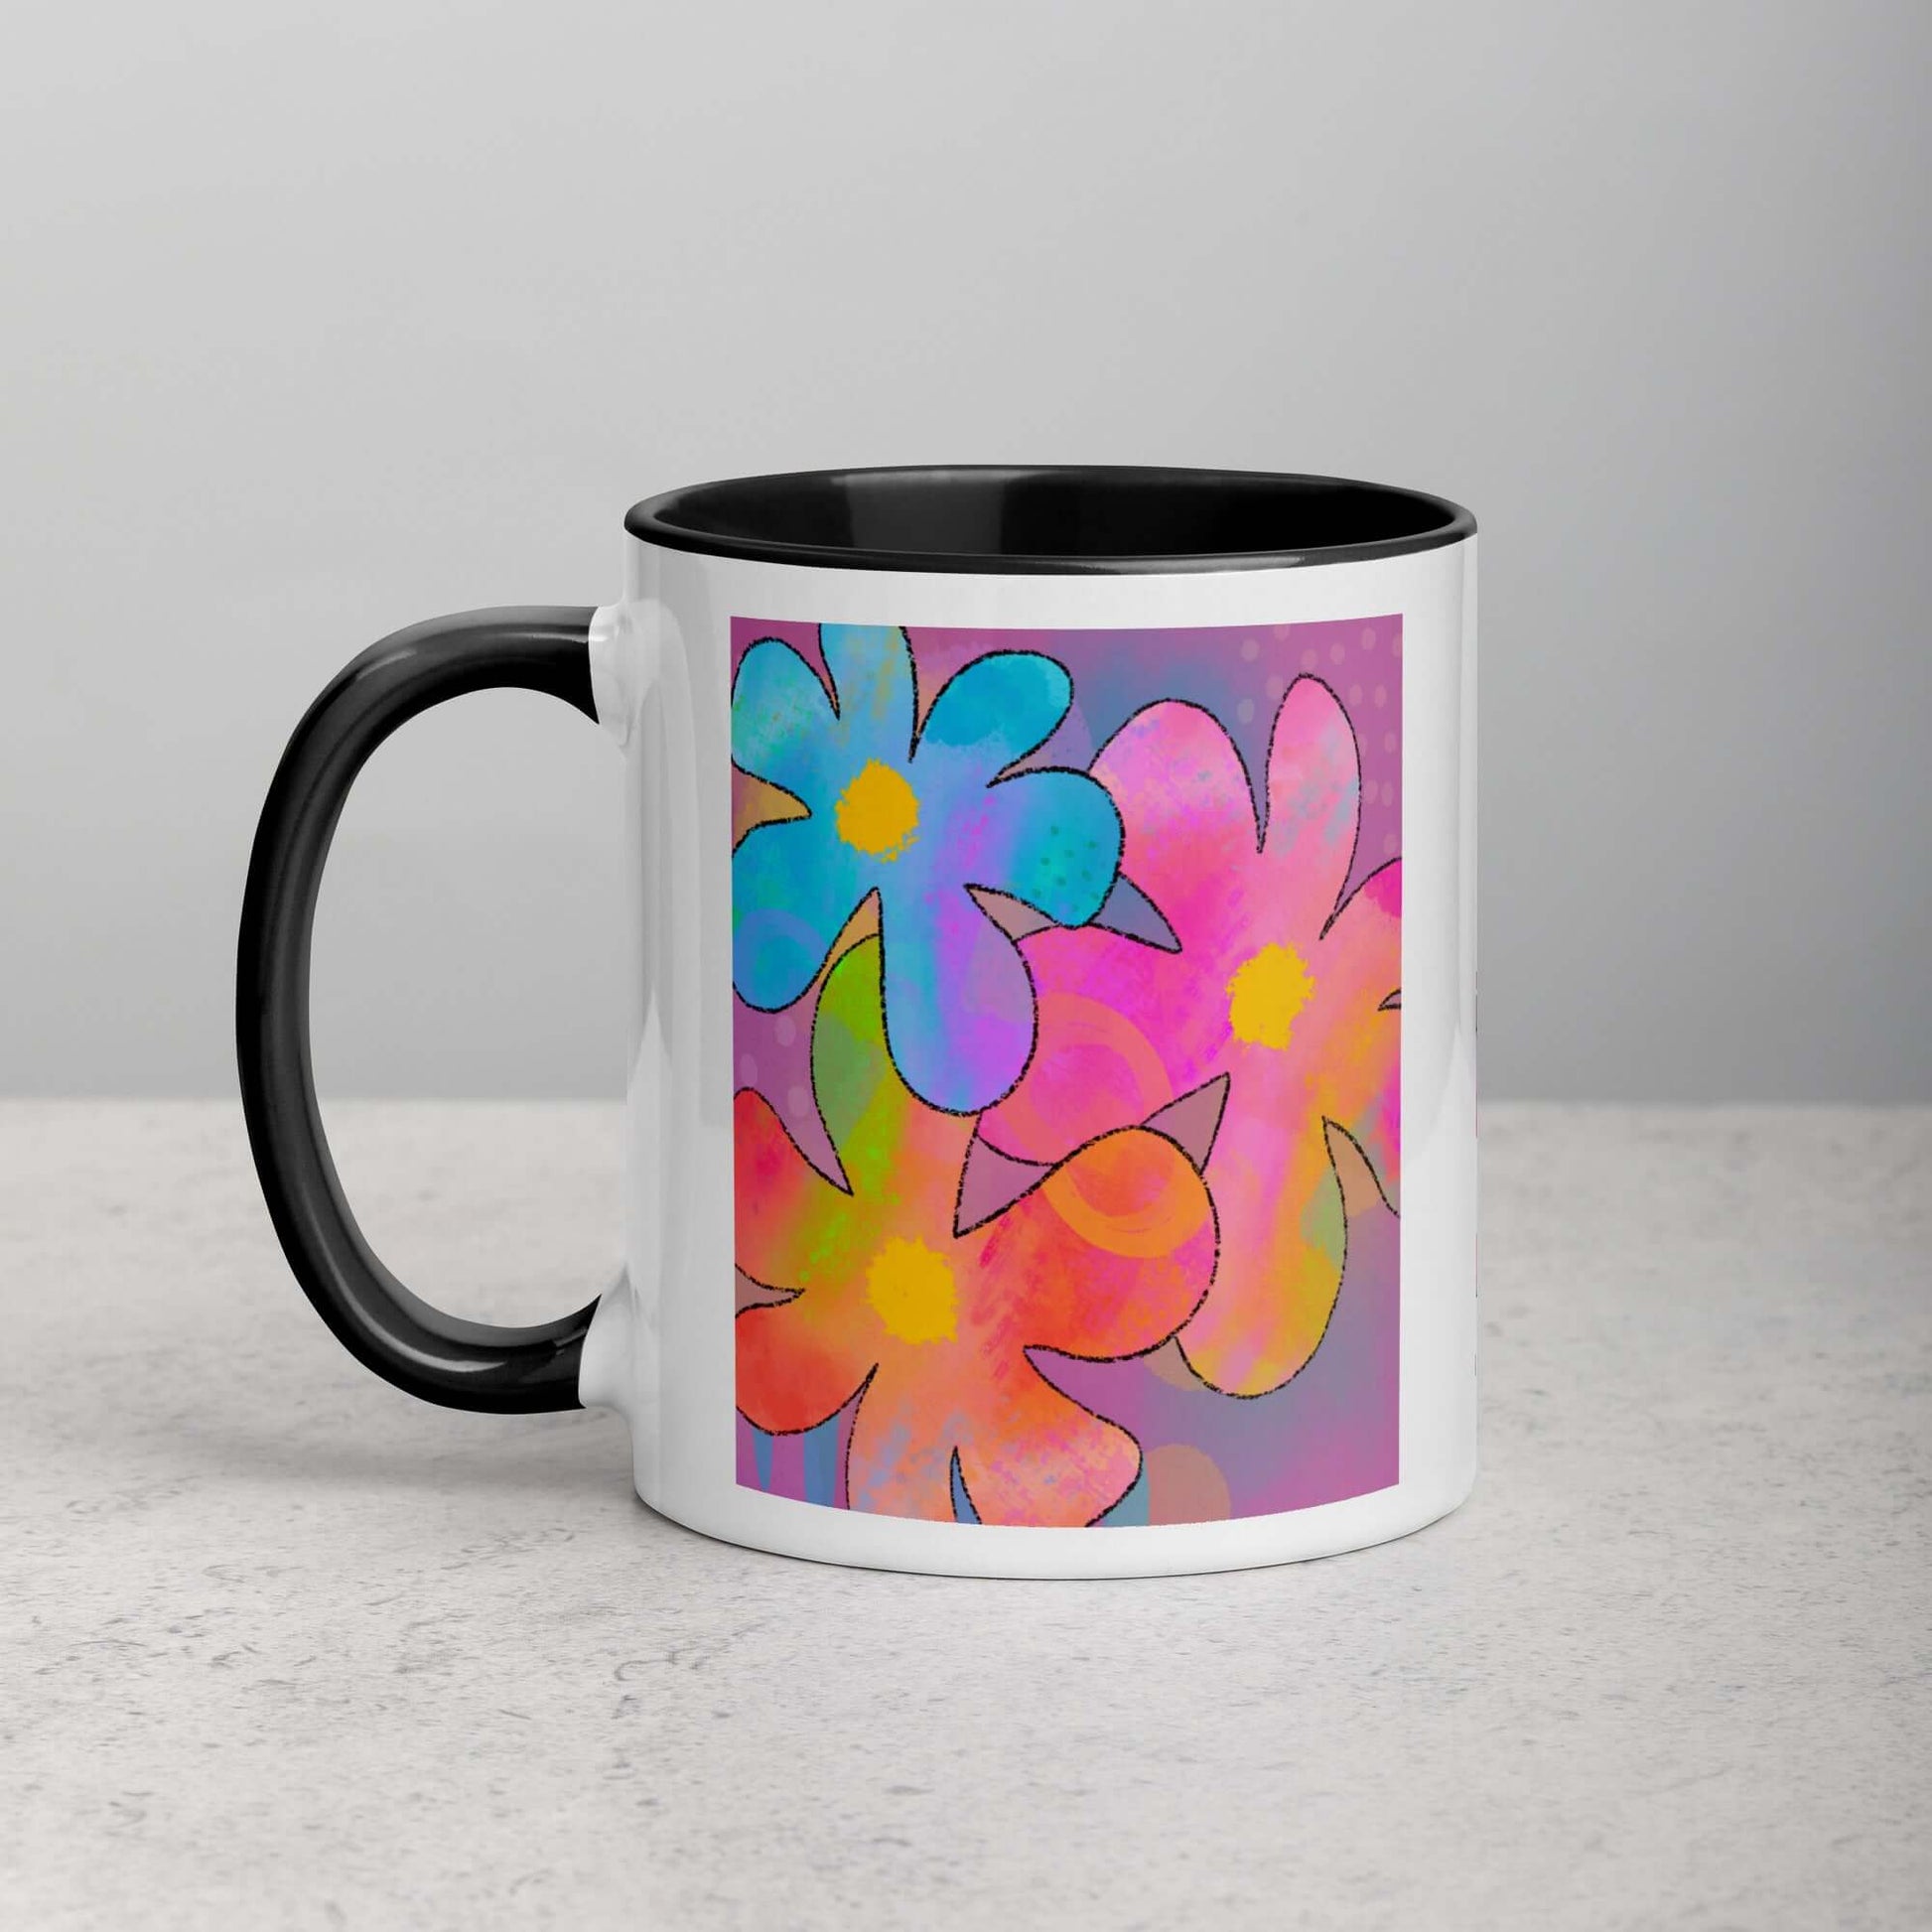 Big Colorful 1960s Psychedelic “Hippie Flowers” Mug with Black Color Inside Left Handed Front View